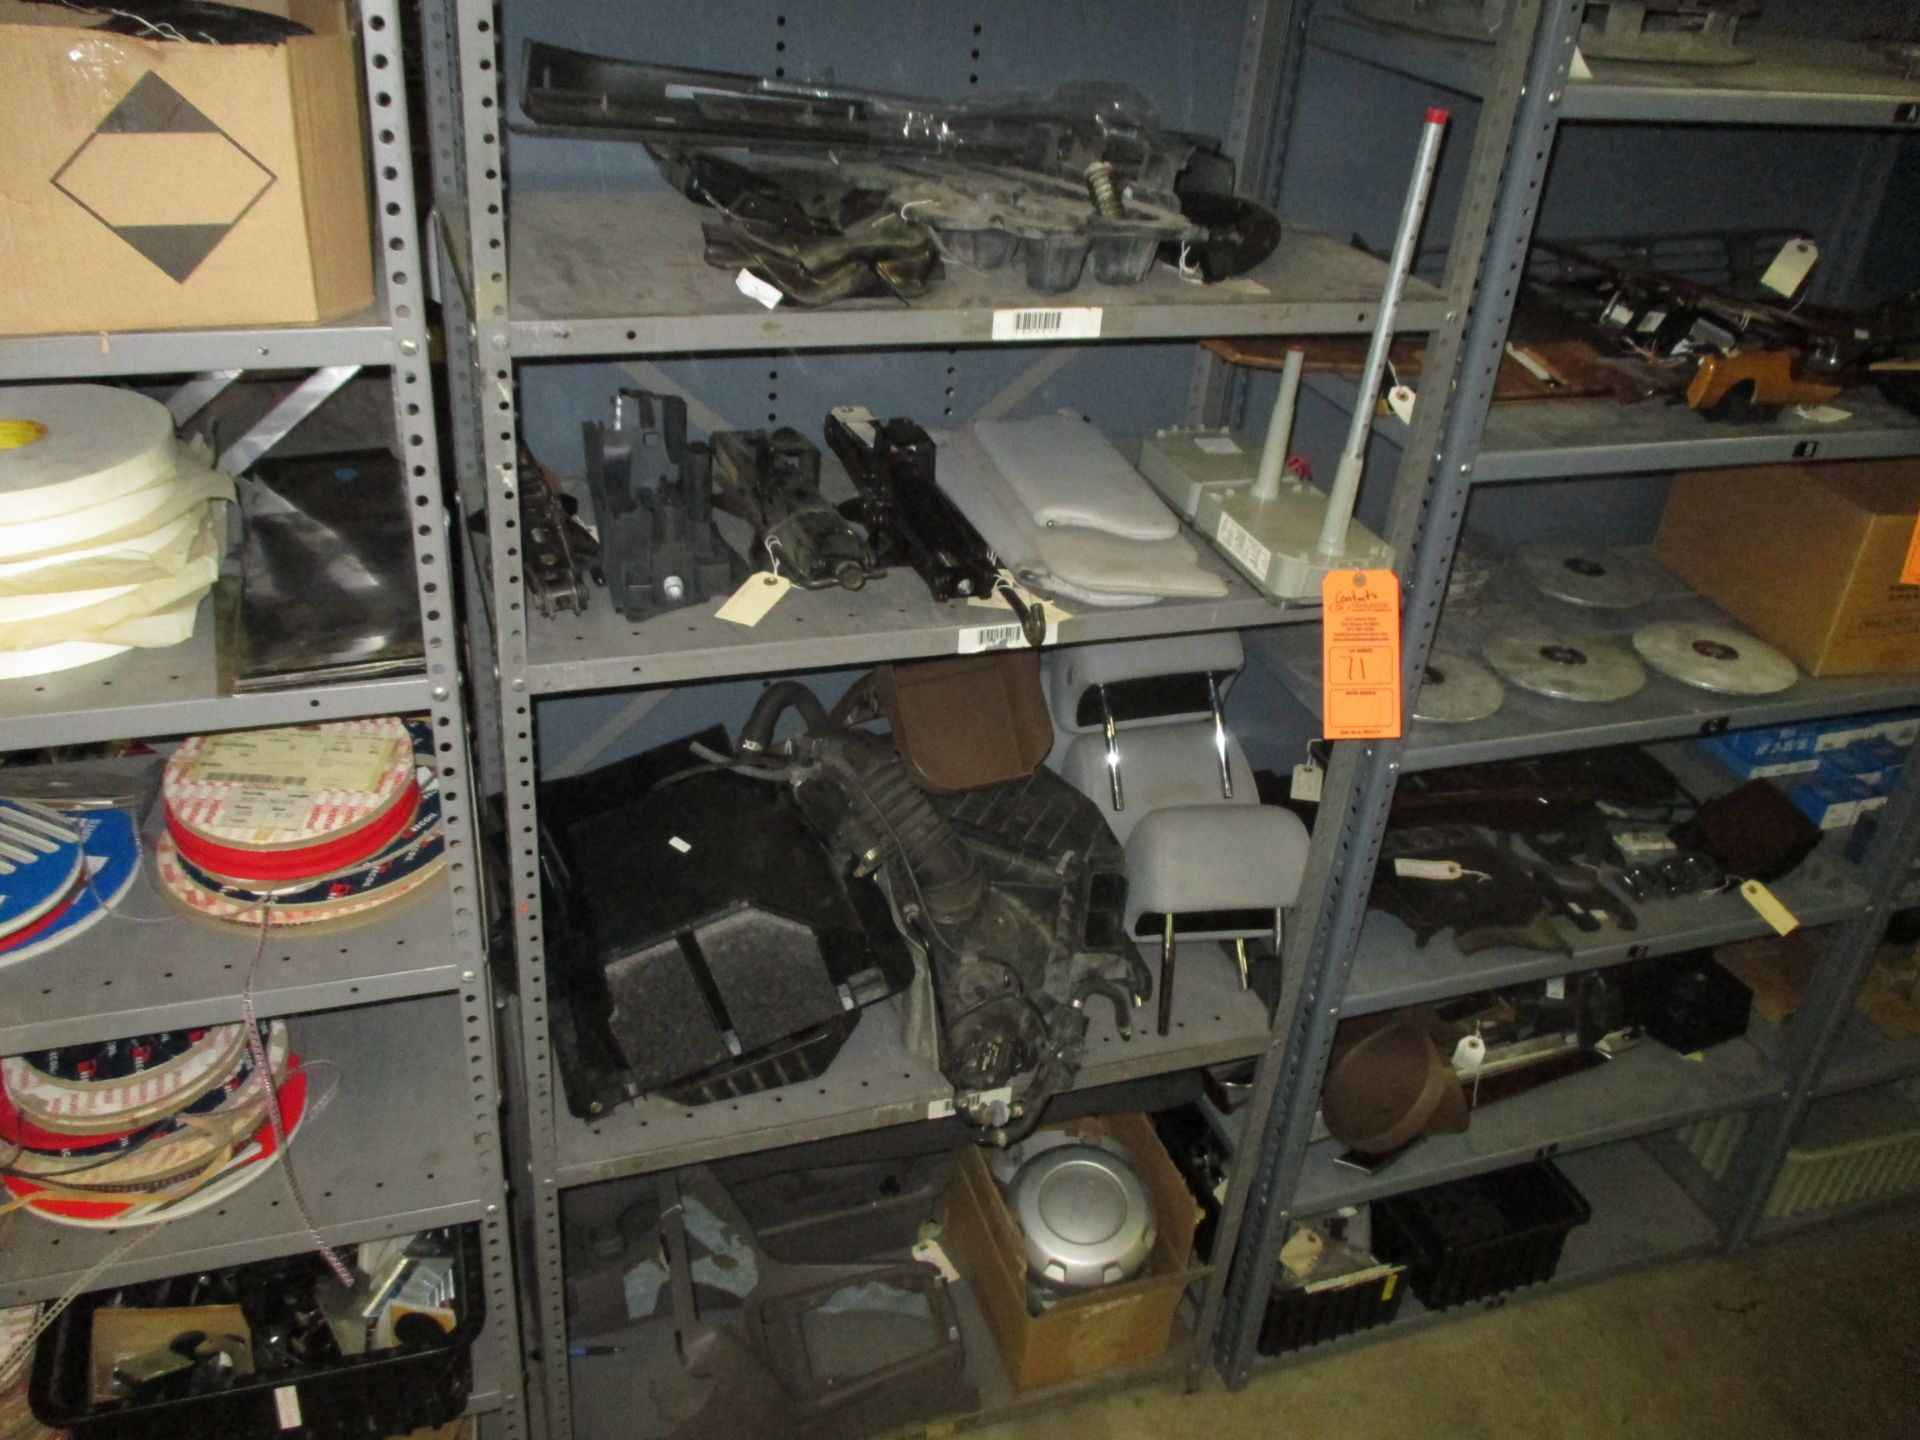 CONTENTS OF SHELF INCLUDING VARIOUS CAR JACKS; HEAD REST; CONSOLE PARTS; FORD WHEEL CAPS & MORE